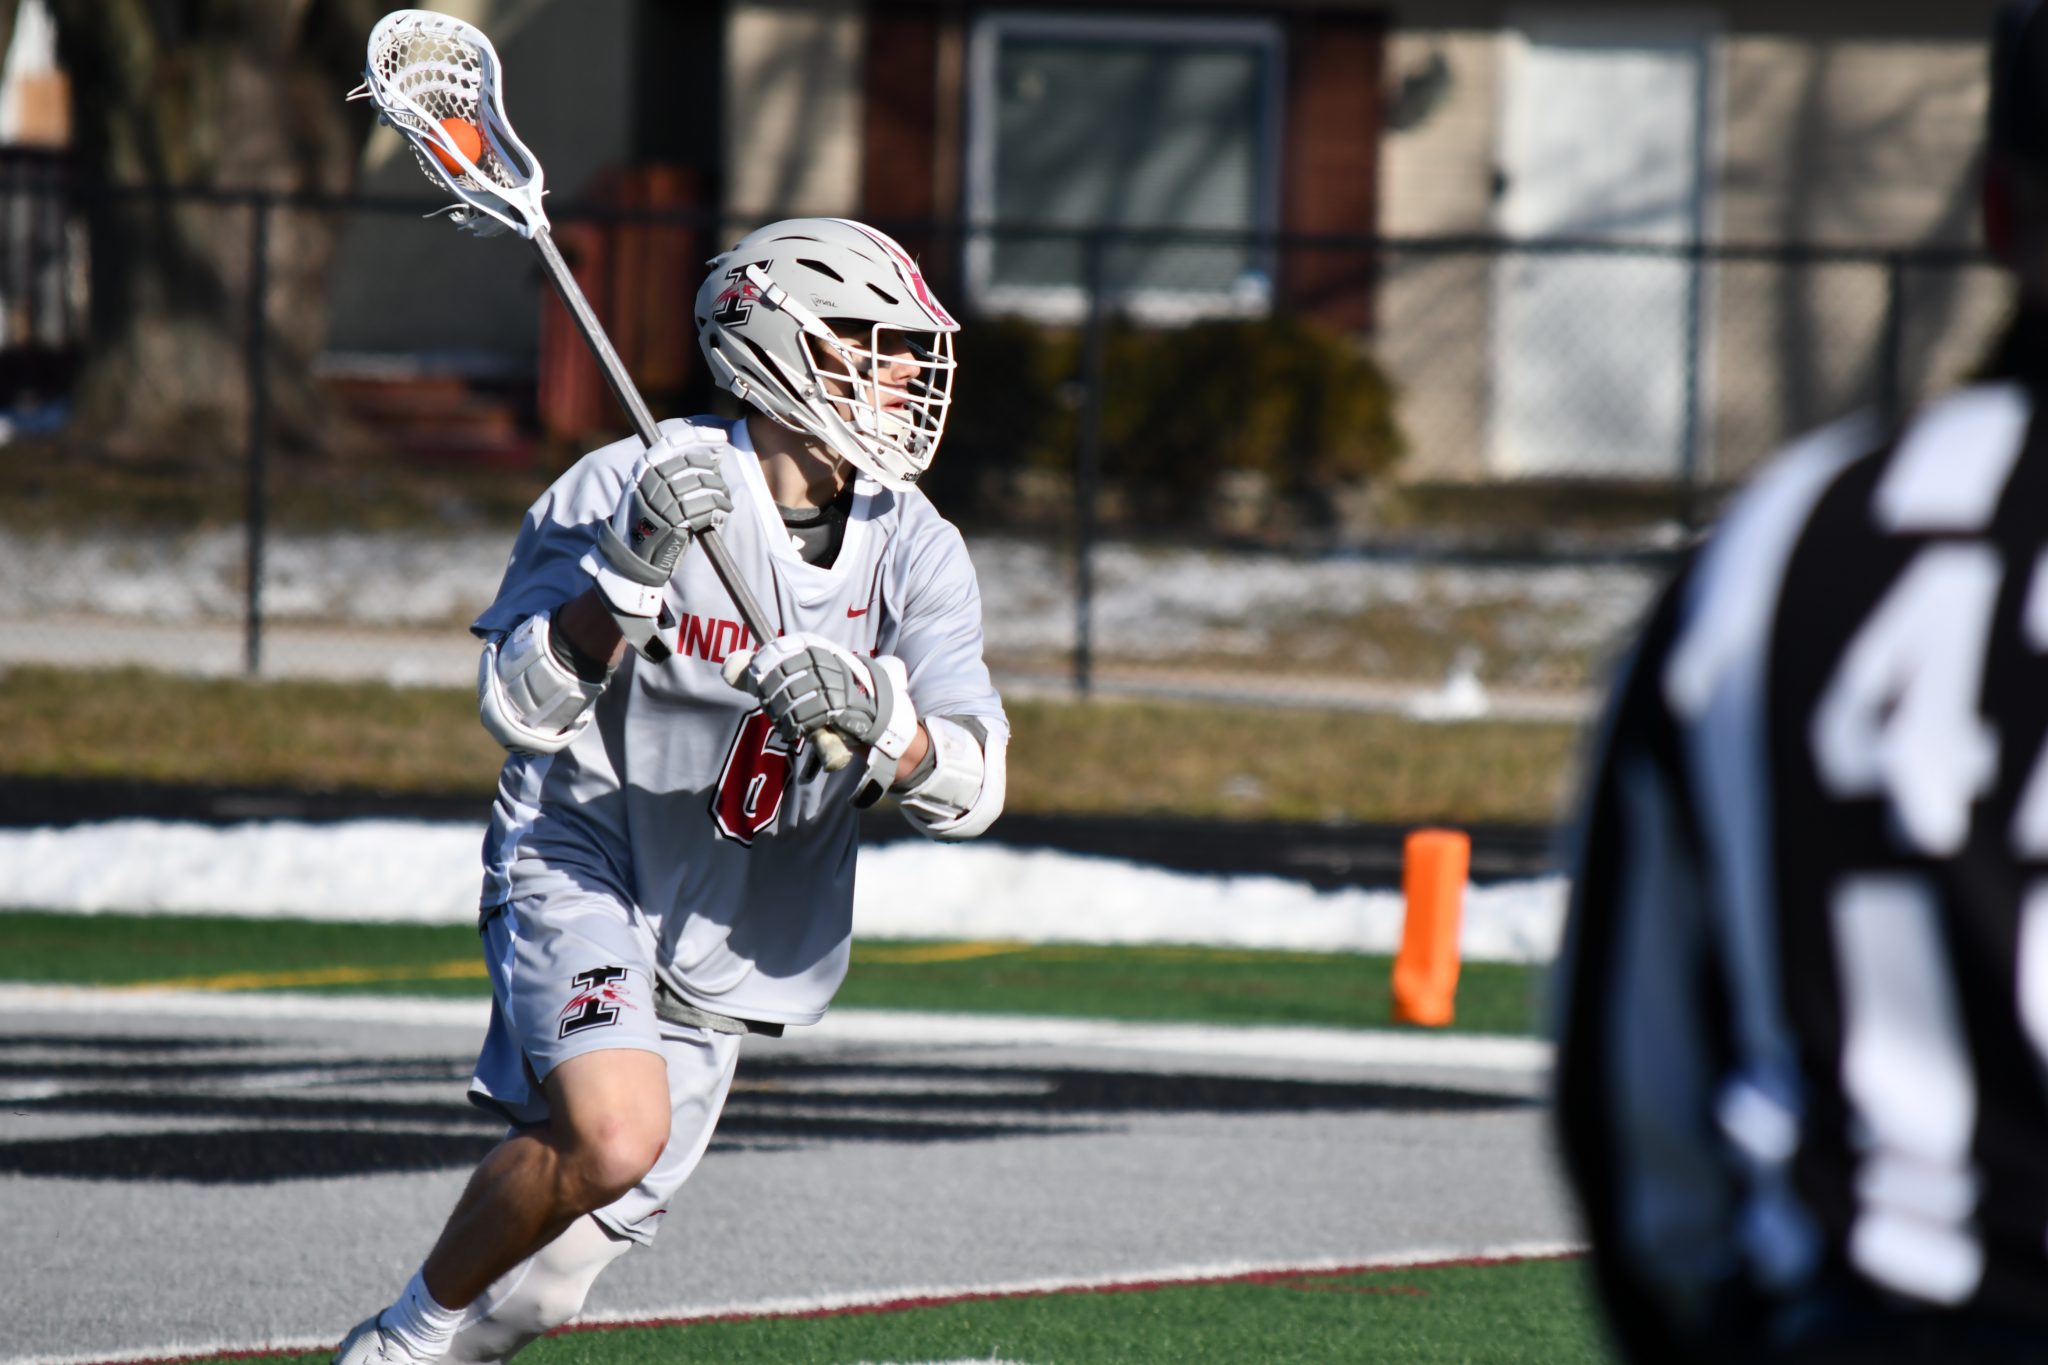 No. 9 ranked UIndy Men’s Lacrosse secures season-opening win over Lewis